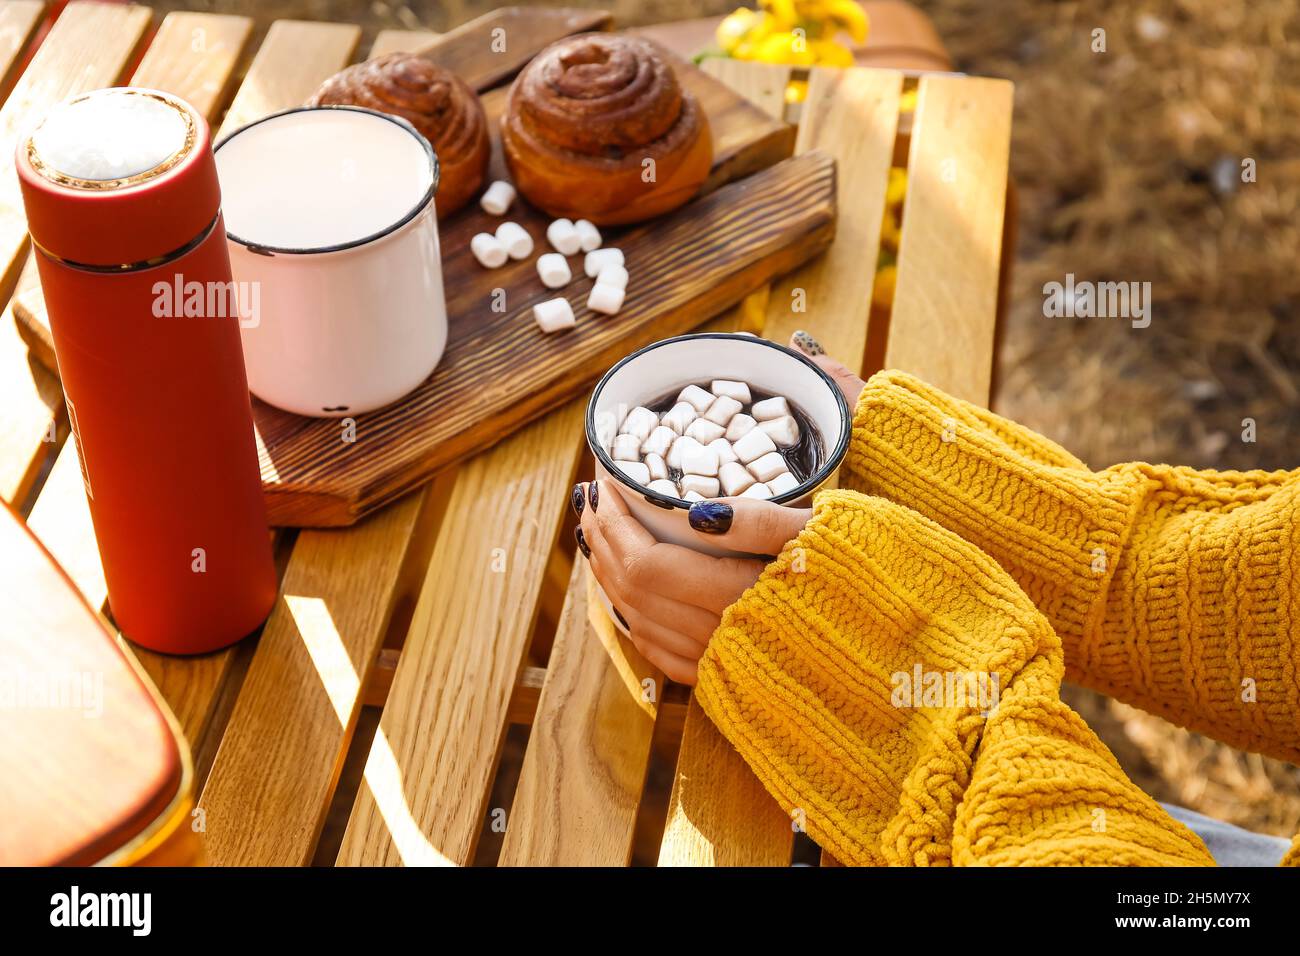 https://c8.alamy.com/comp/2H5MY7X/young-woman-drinking-hot-chocolate-on-autumn-day-2H5MY7X.jpg